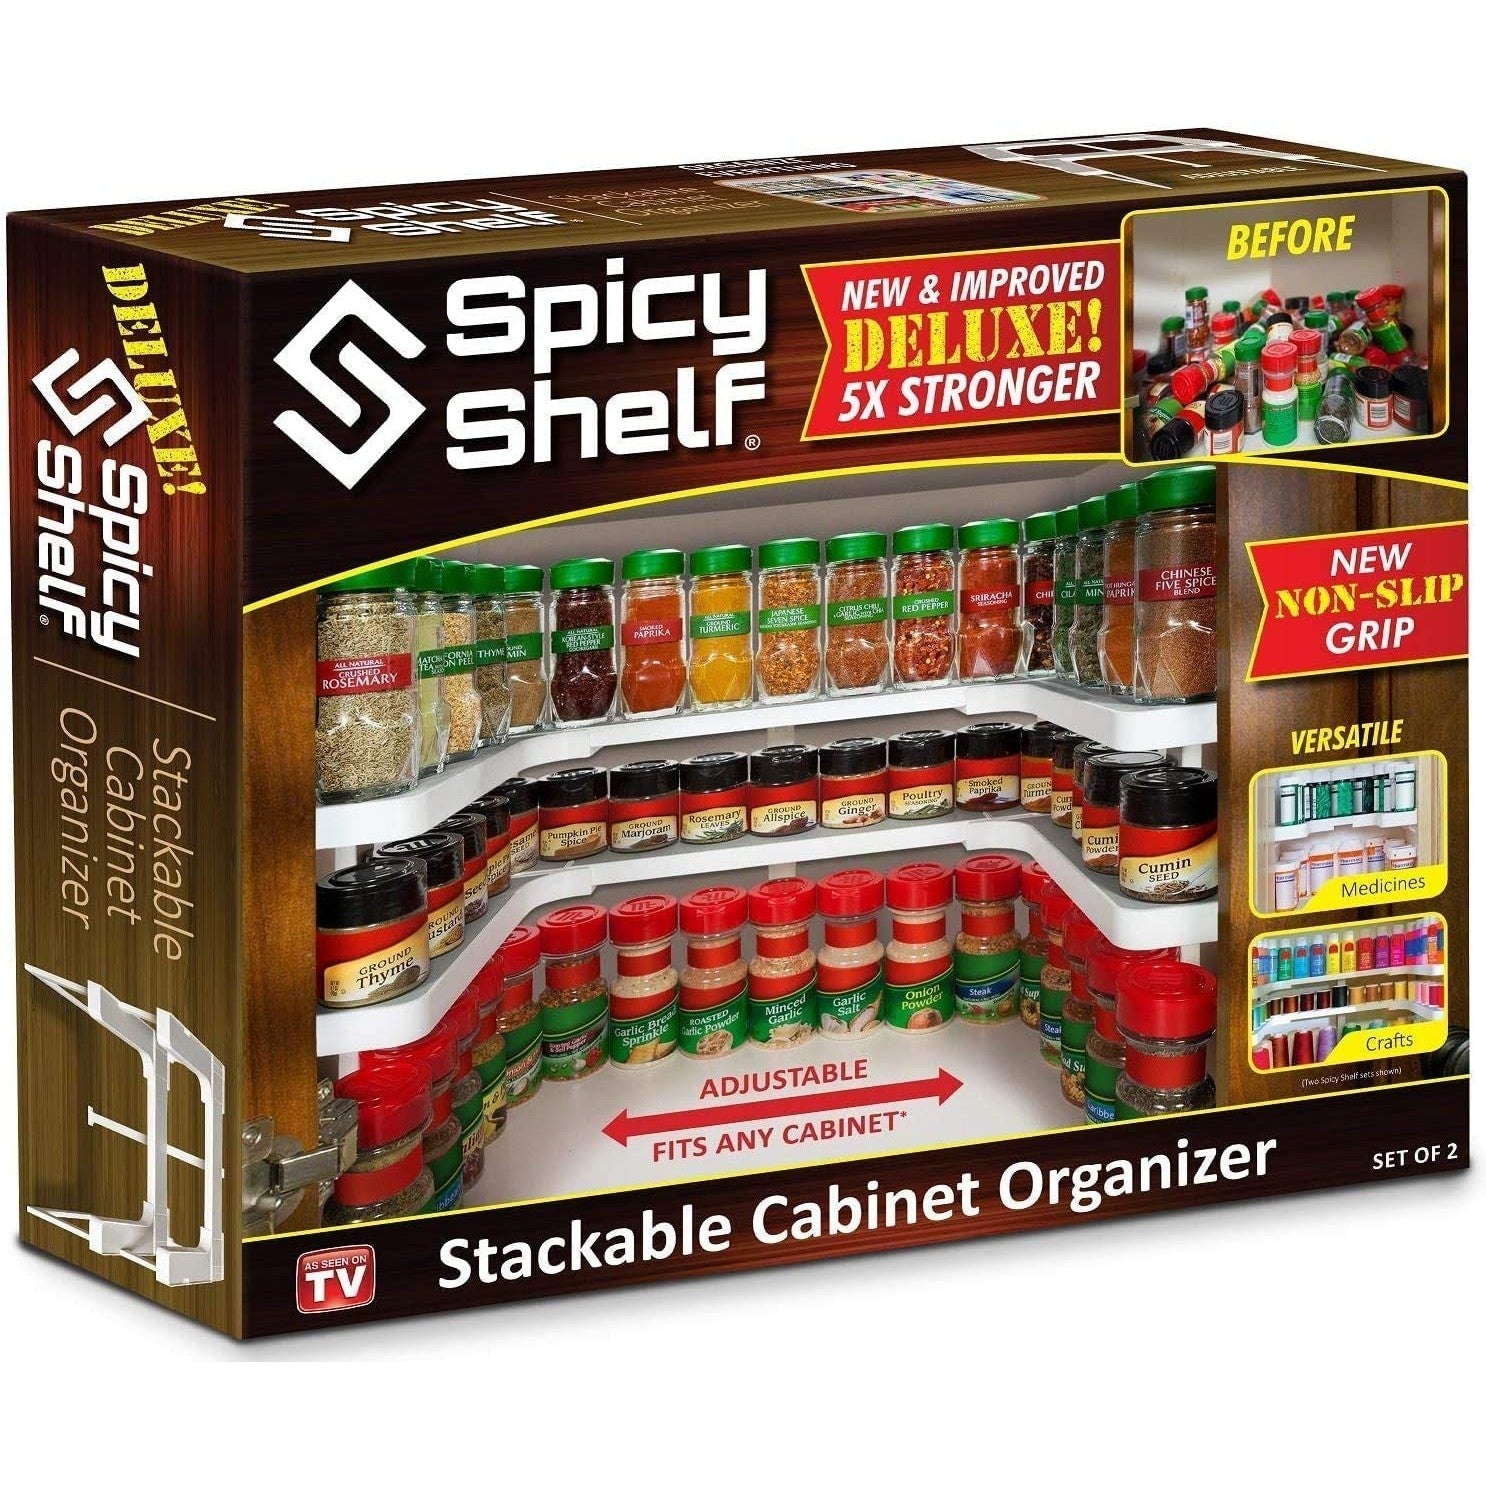 The packaging and box for a stackable cabinet spice organizer.